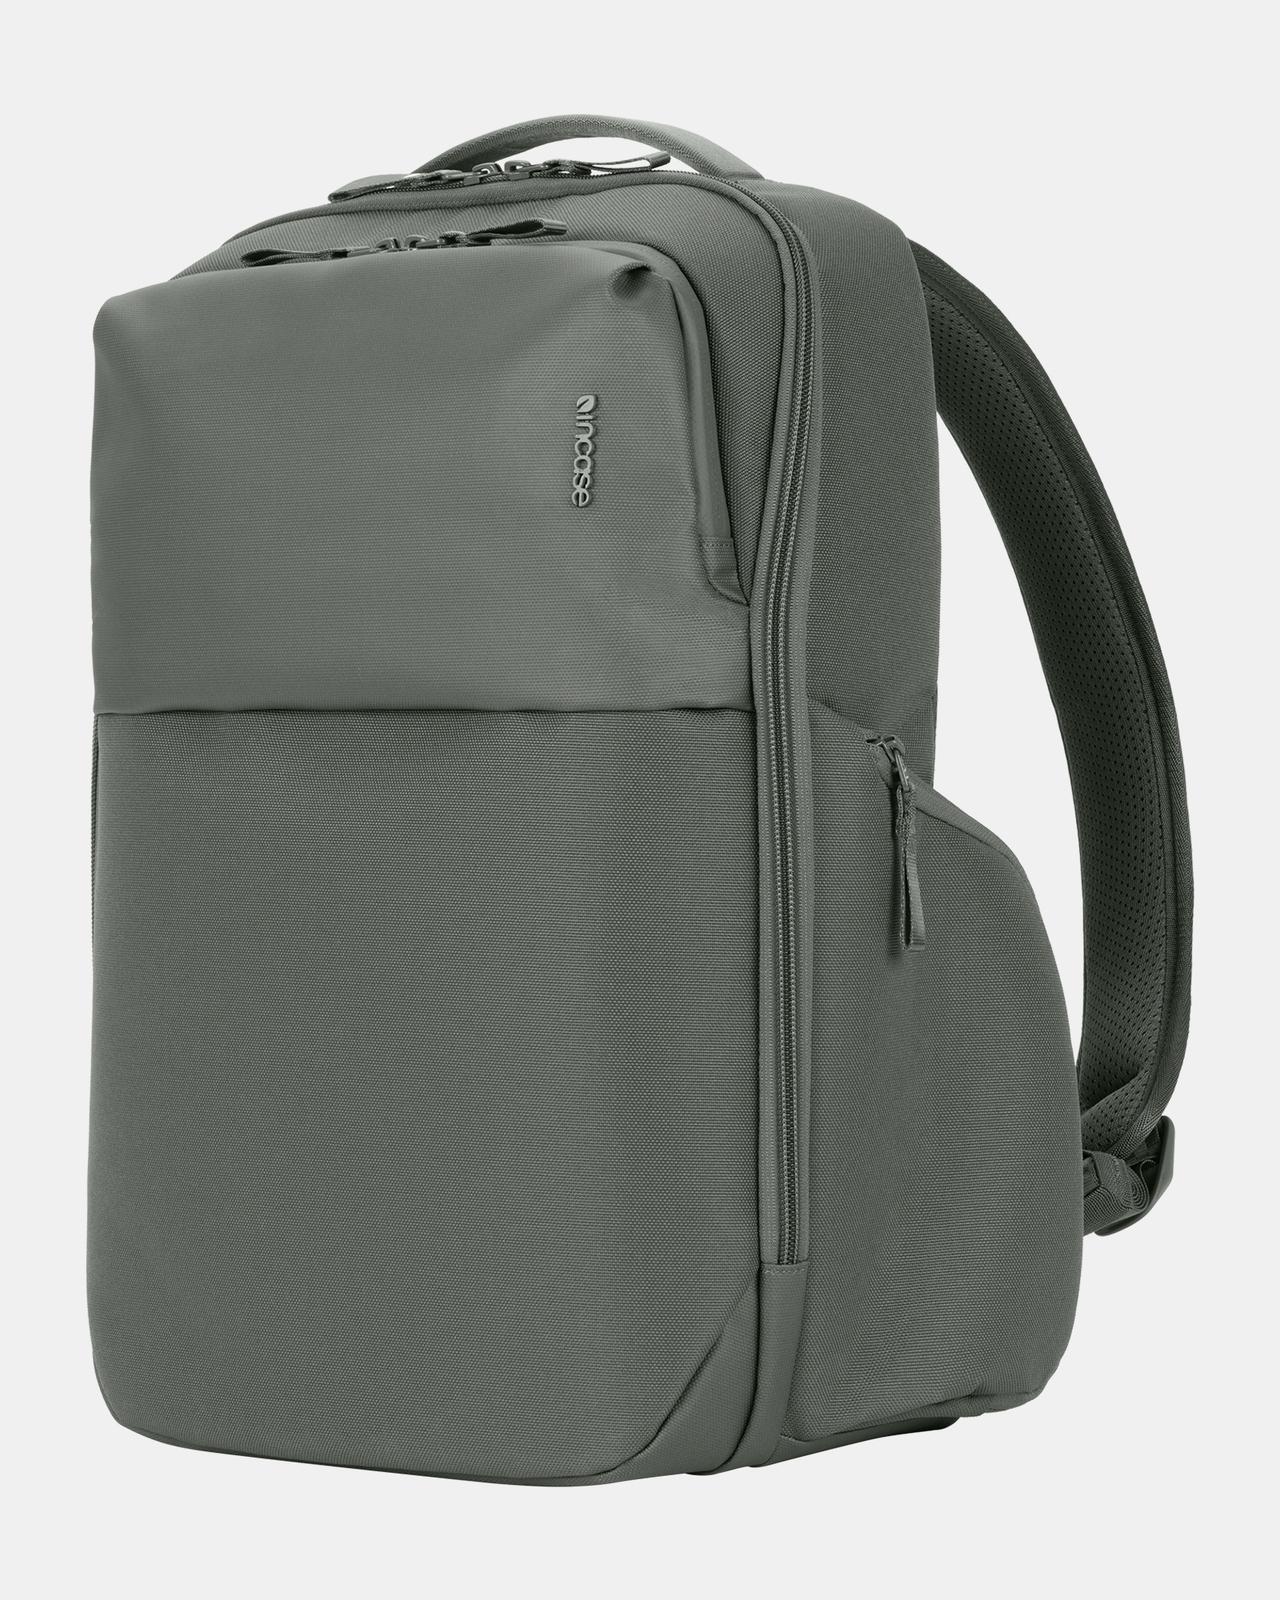 Incase A.R.C. Daypack Backpack Laptop Bag Smoked Ivy